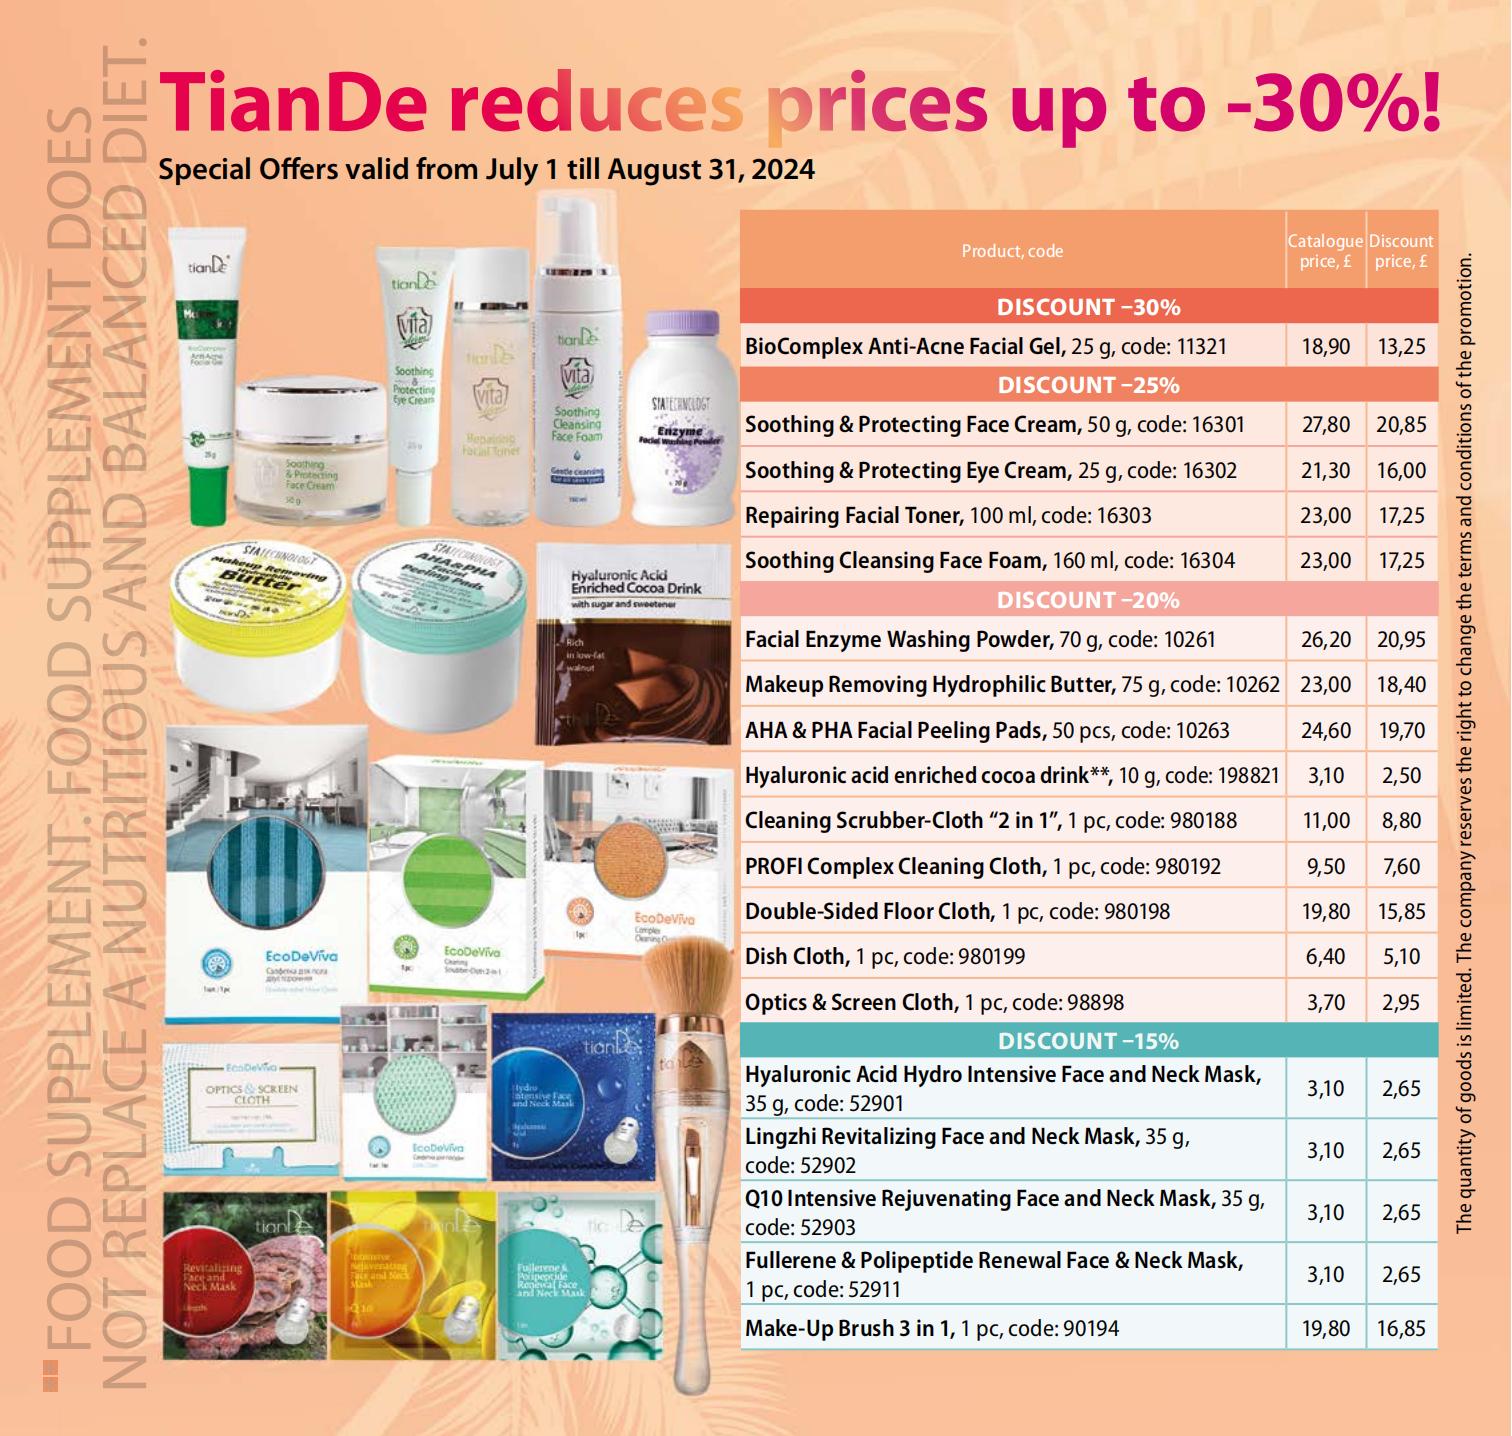 Tiande promotions